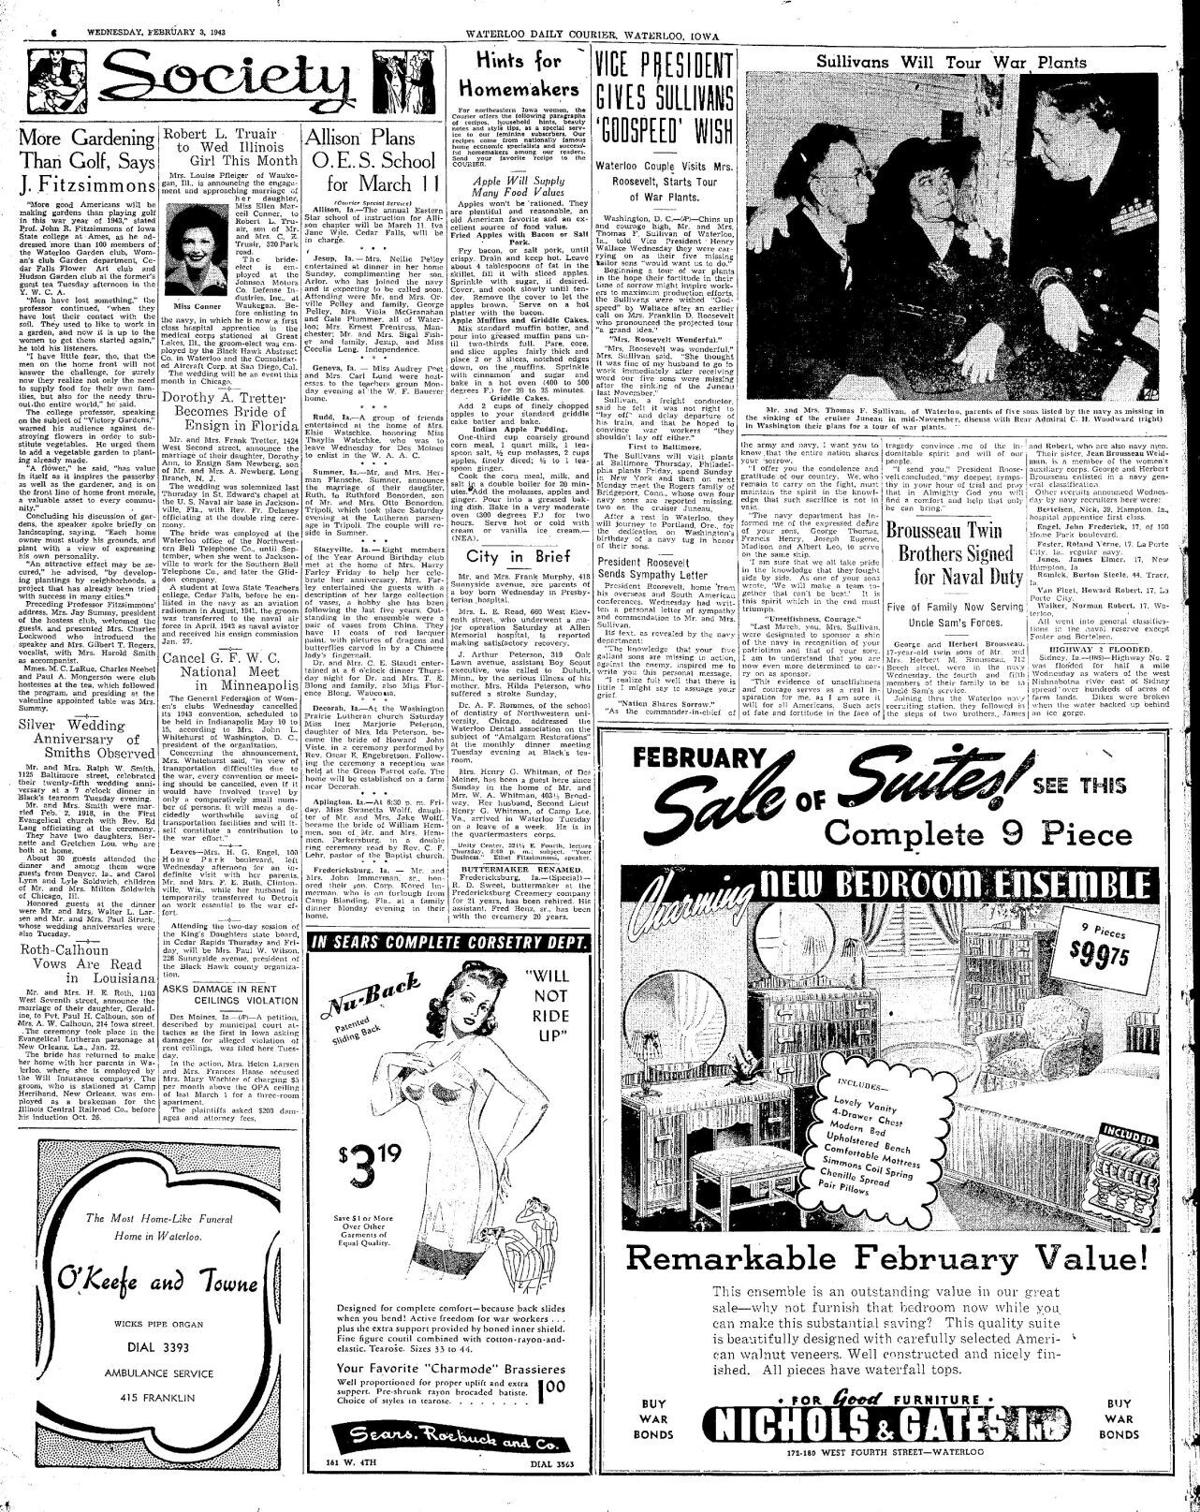 Courier Feb. 3, 1943